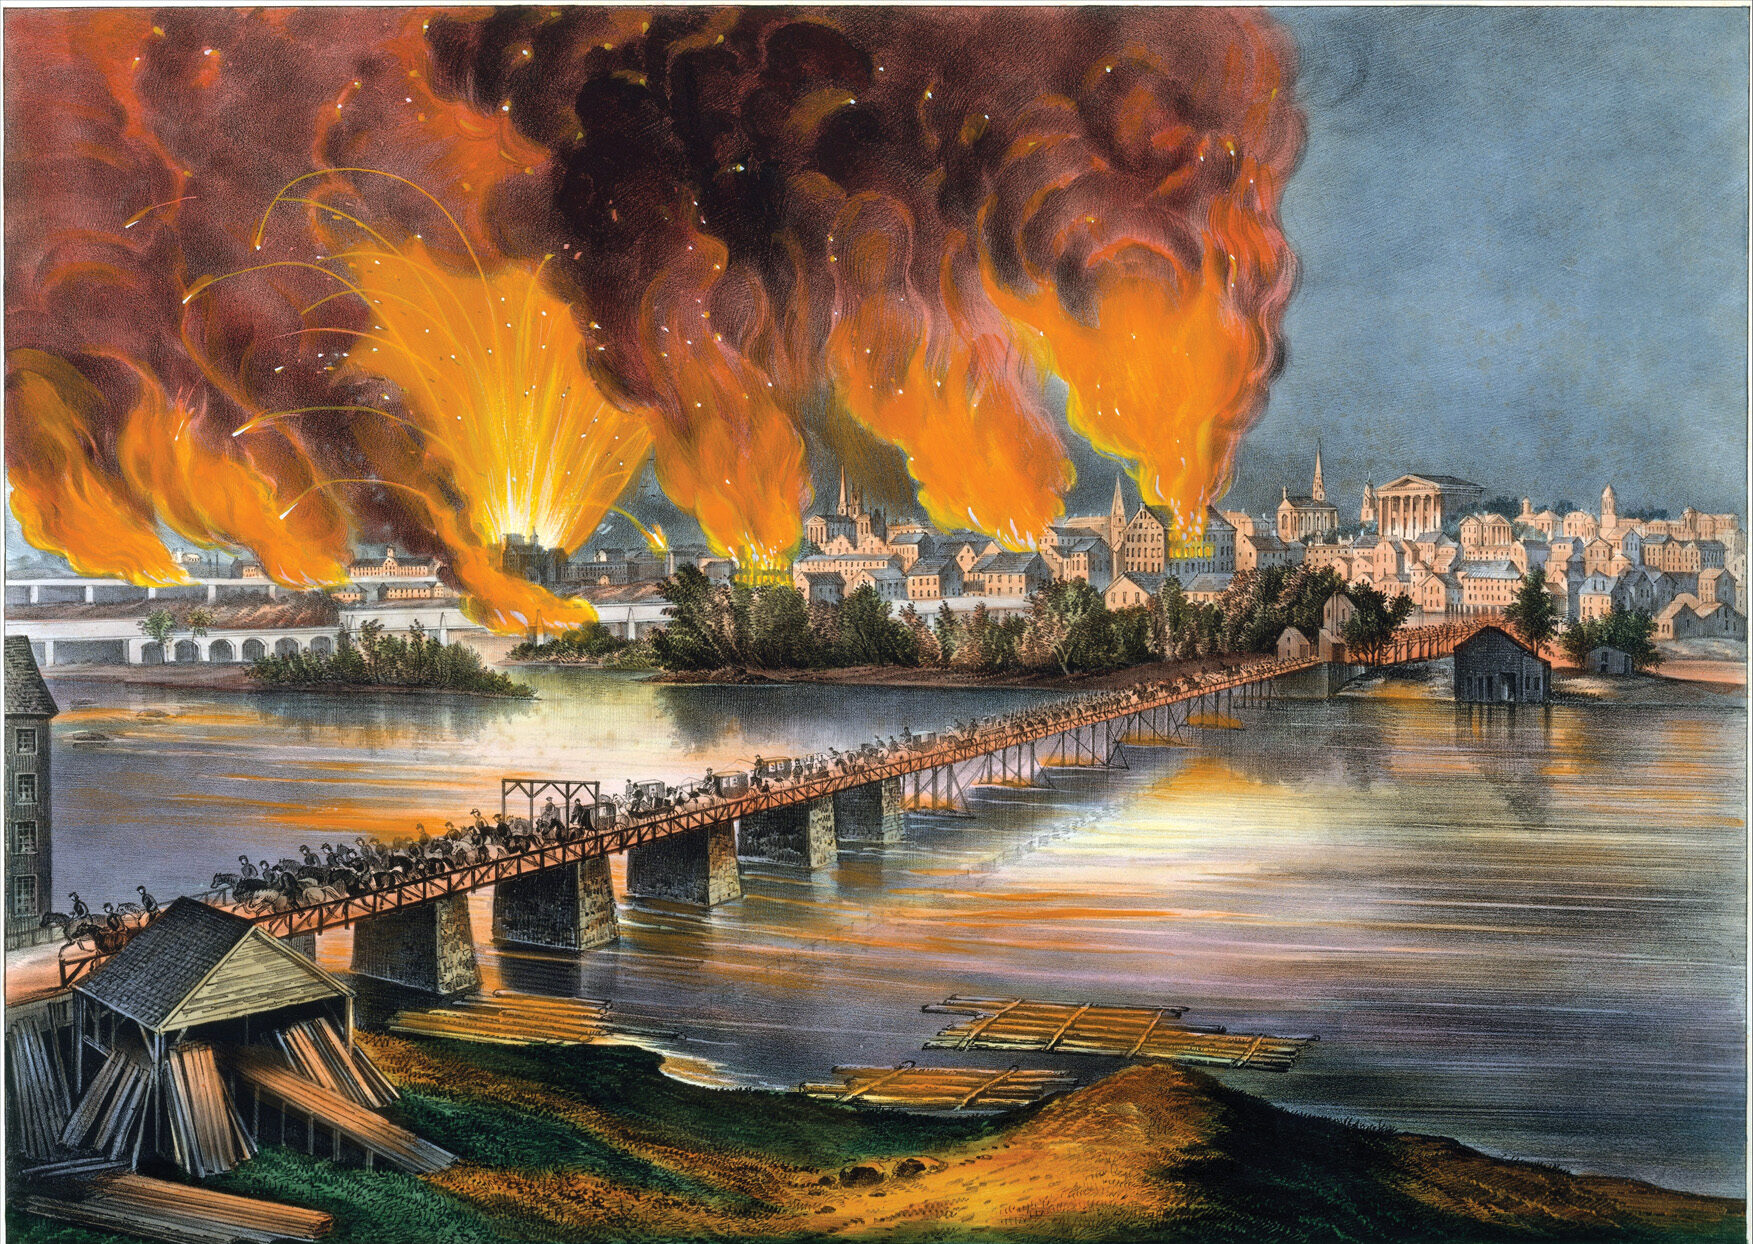 With Richmond in flames behind them, Robert E. Lee’s Confederate troops march west for Lynchburg. They were just 20 miles from their objective when forced to surrender less than a week later at Appomattox Court House.